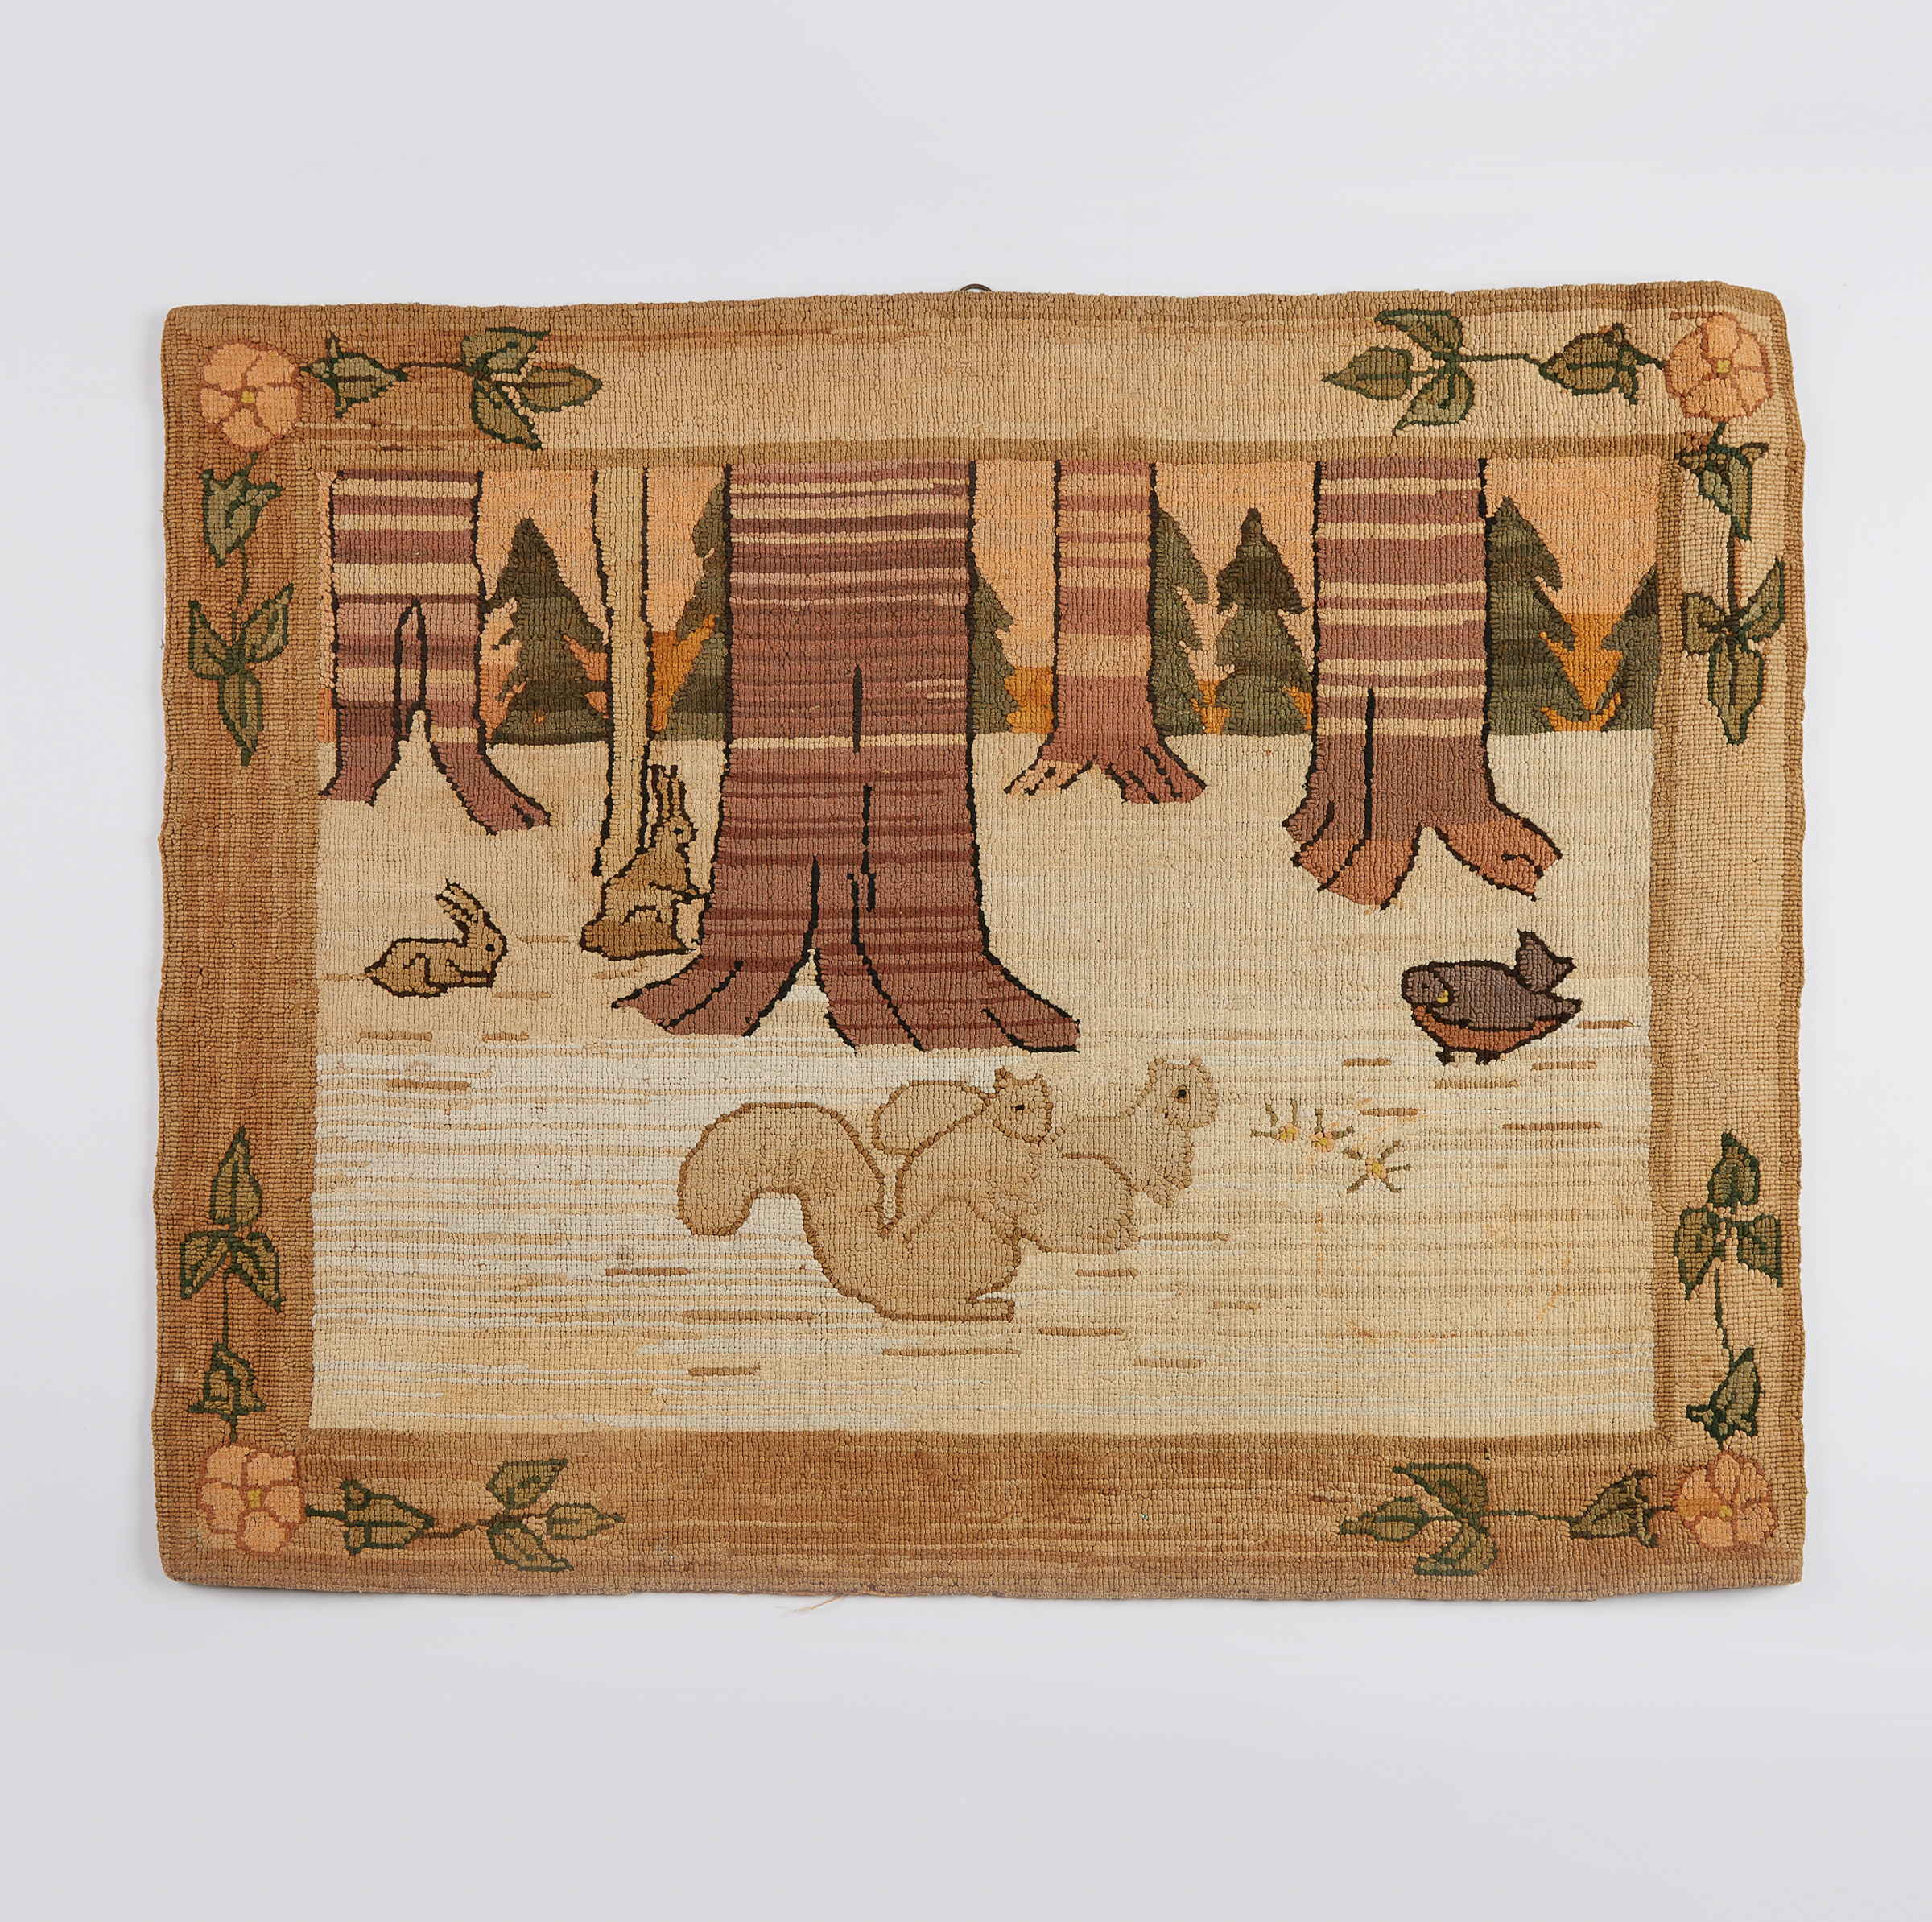 Grenfell Labrador Industries Squirrels in Forest Hooked Mat, c.1930